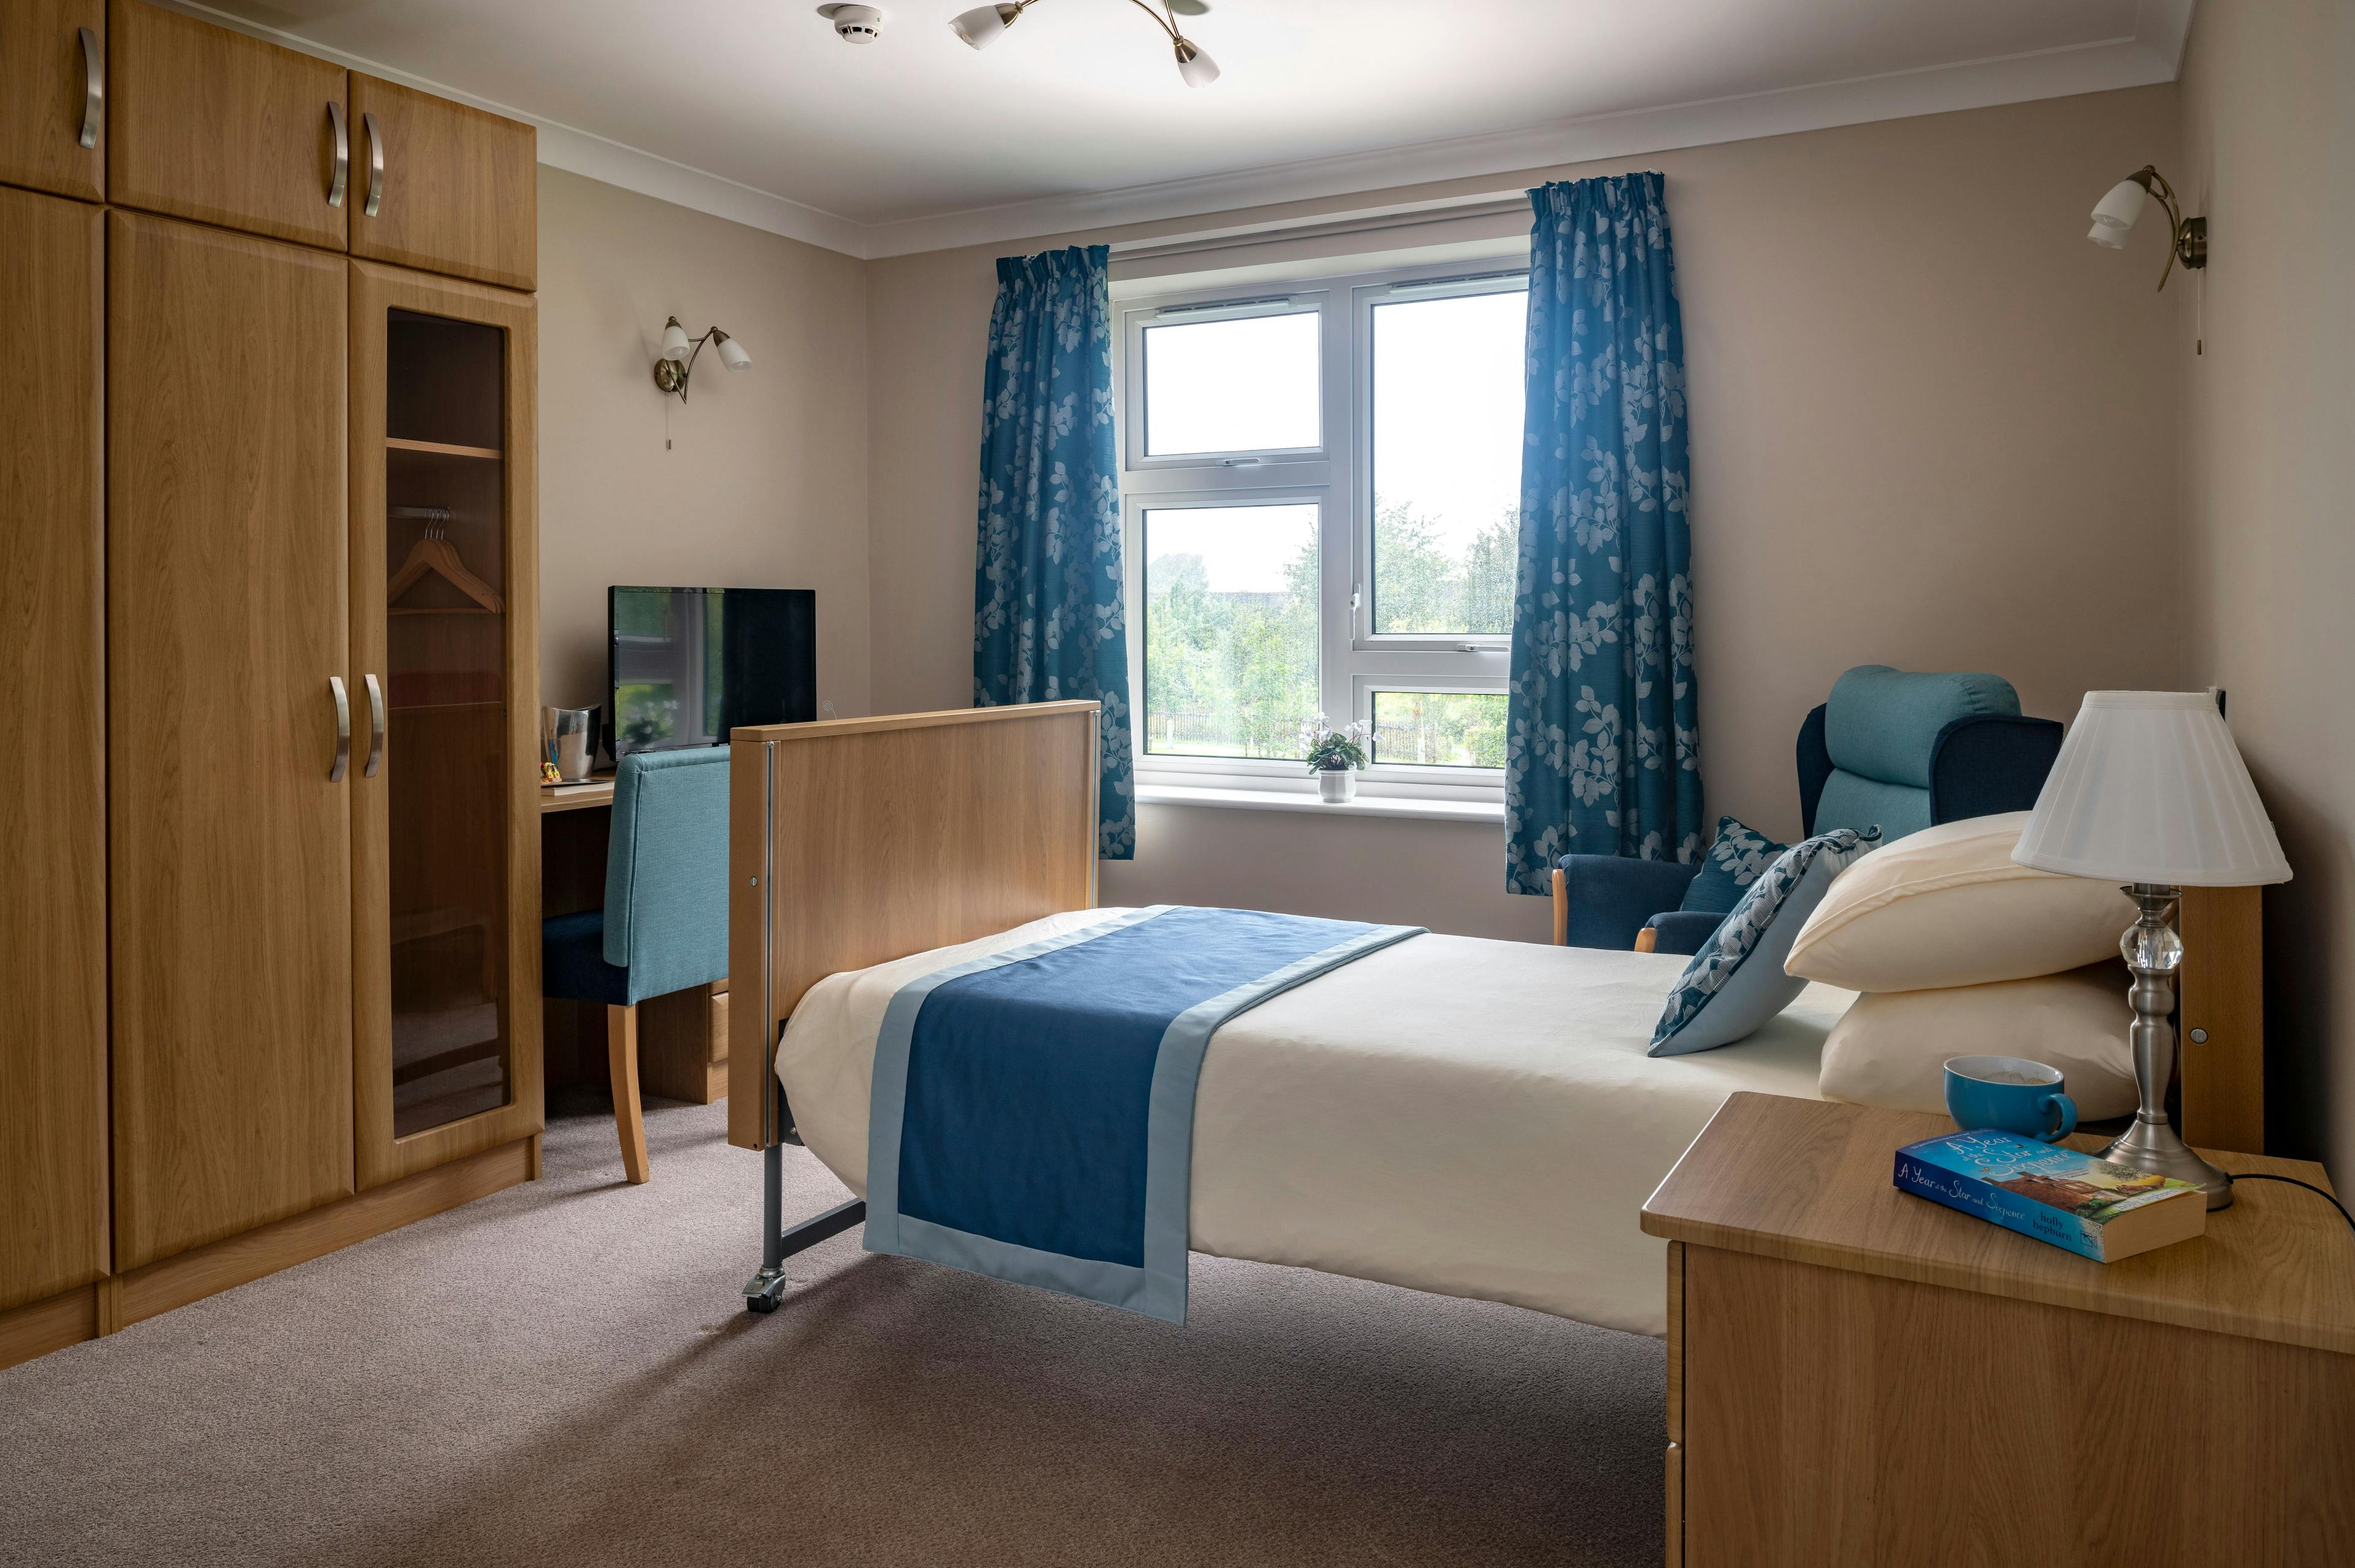 Bedroom at The Lakes Care Home in Cirencester, Cotsworld